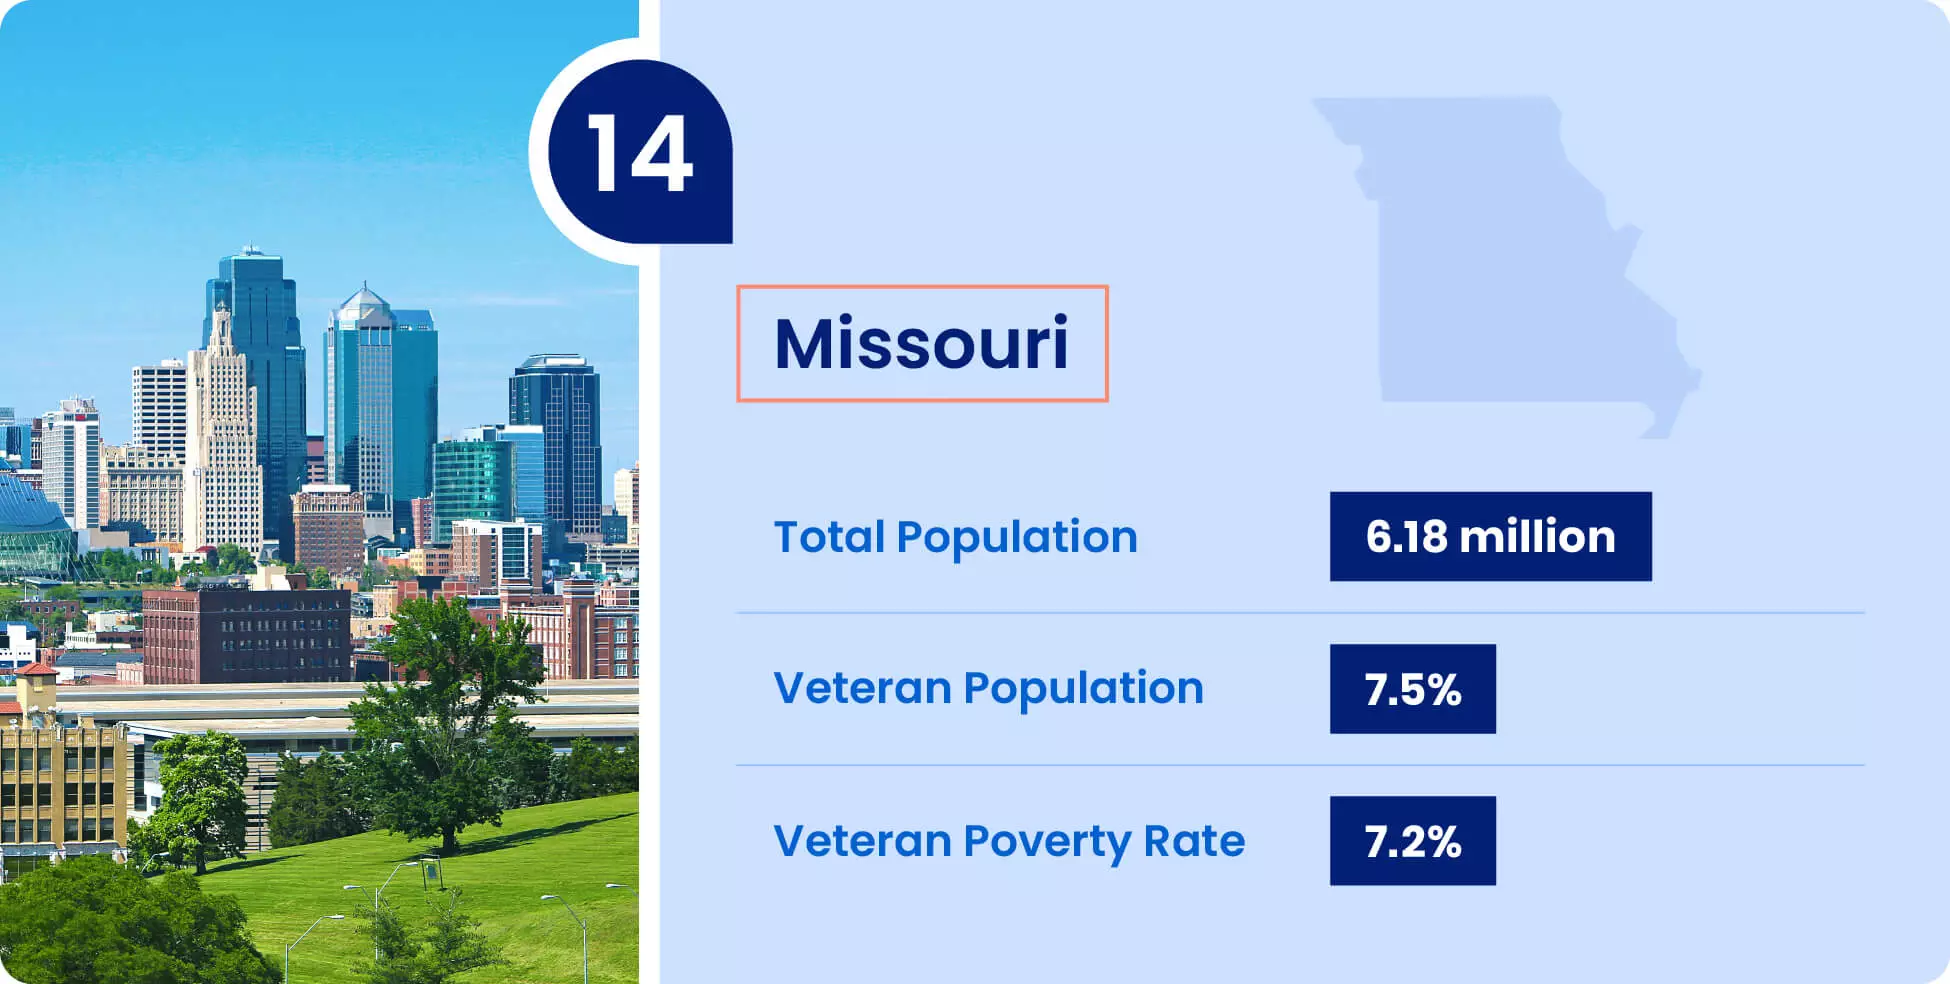 Image shows key information for military retirees thinking of moving to Missouri.